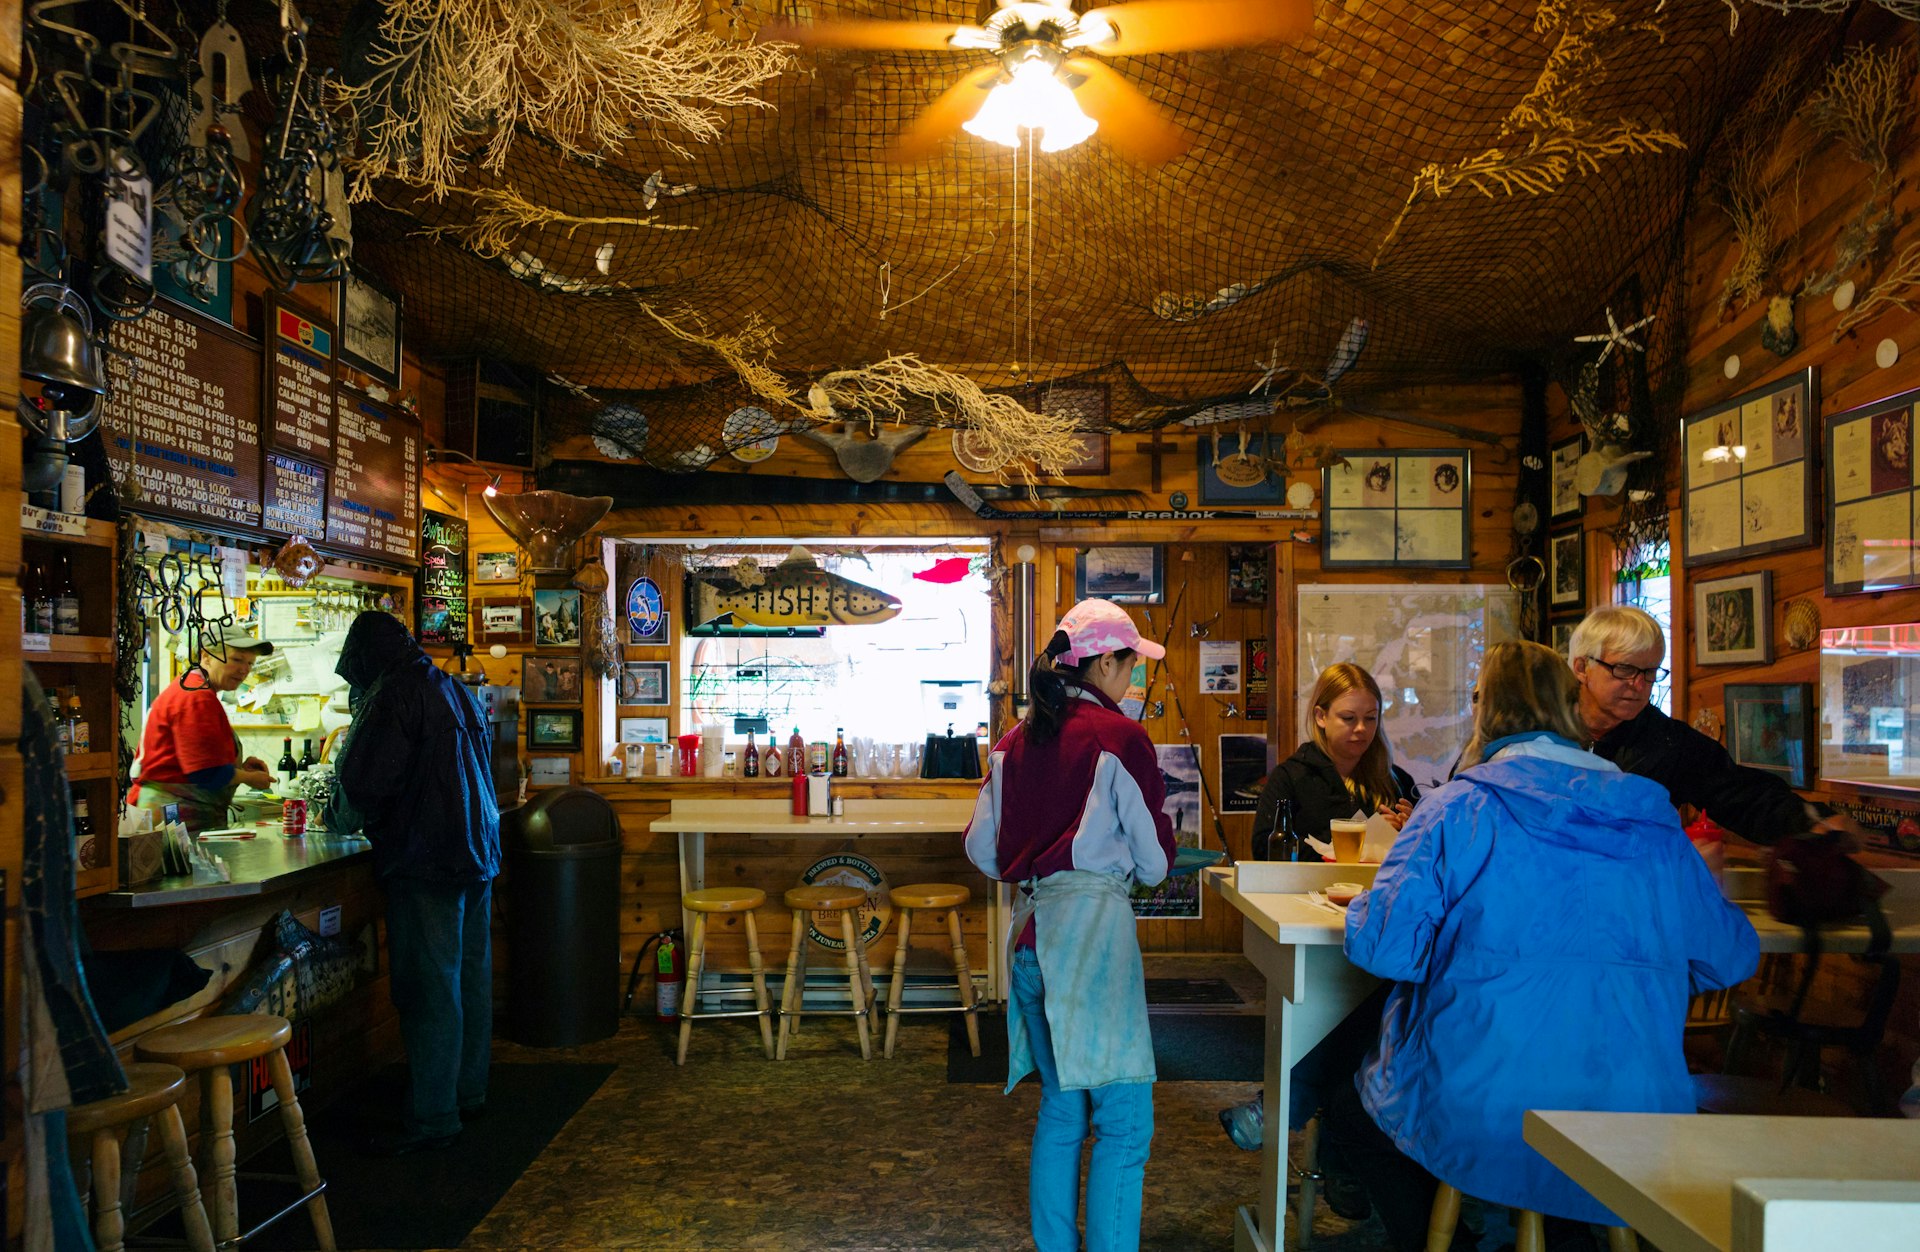 Visitors dining inside the Swiftwater Seafood Cafe, Whittier, Alaska, USA